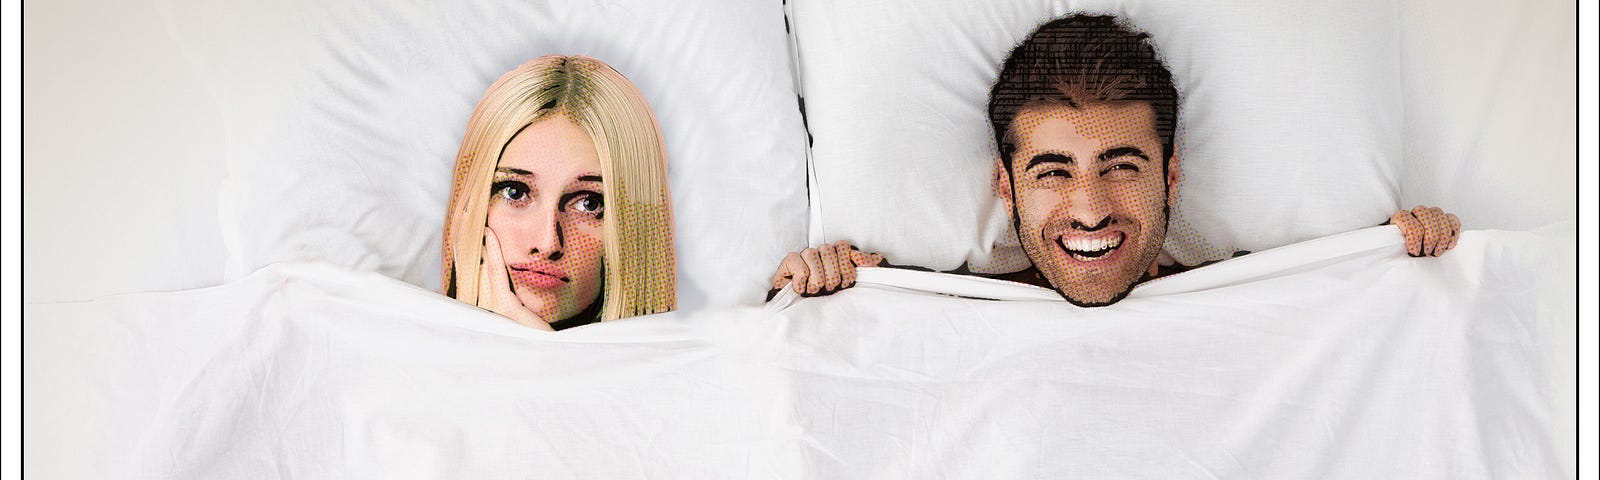 Couple in bed. He’s thrilled, she’s bored